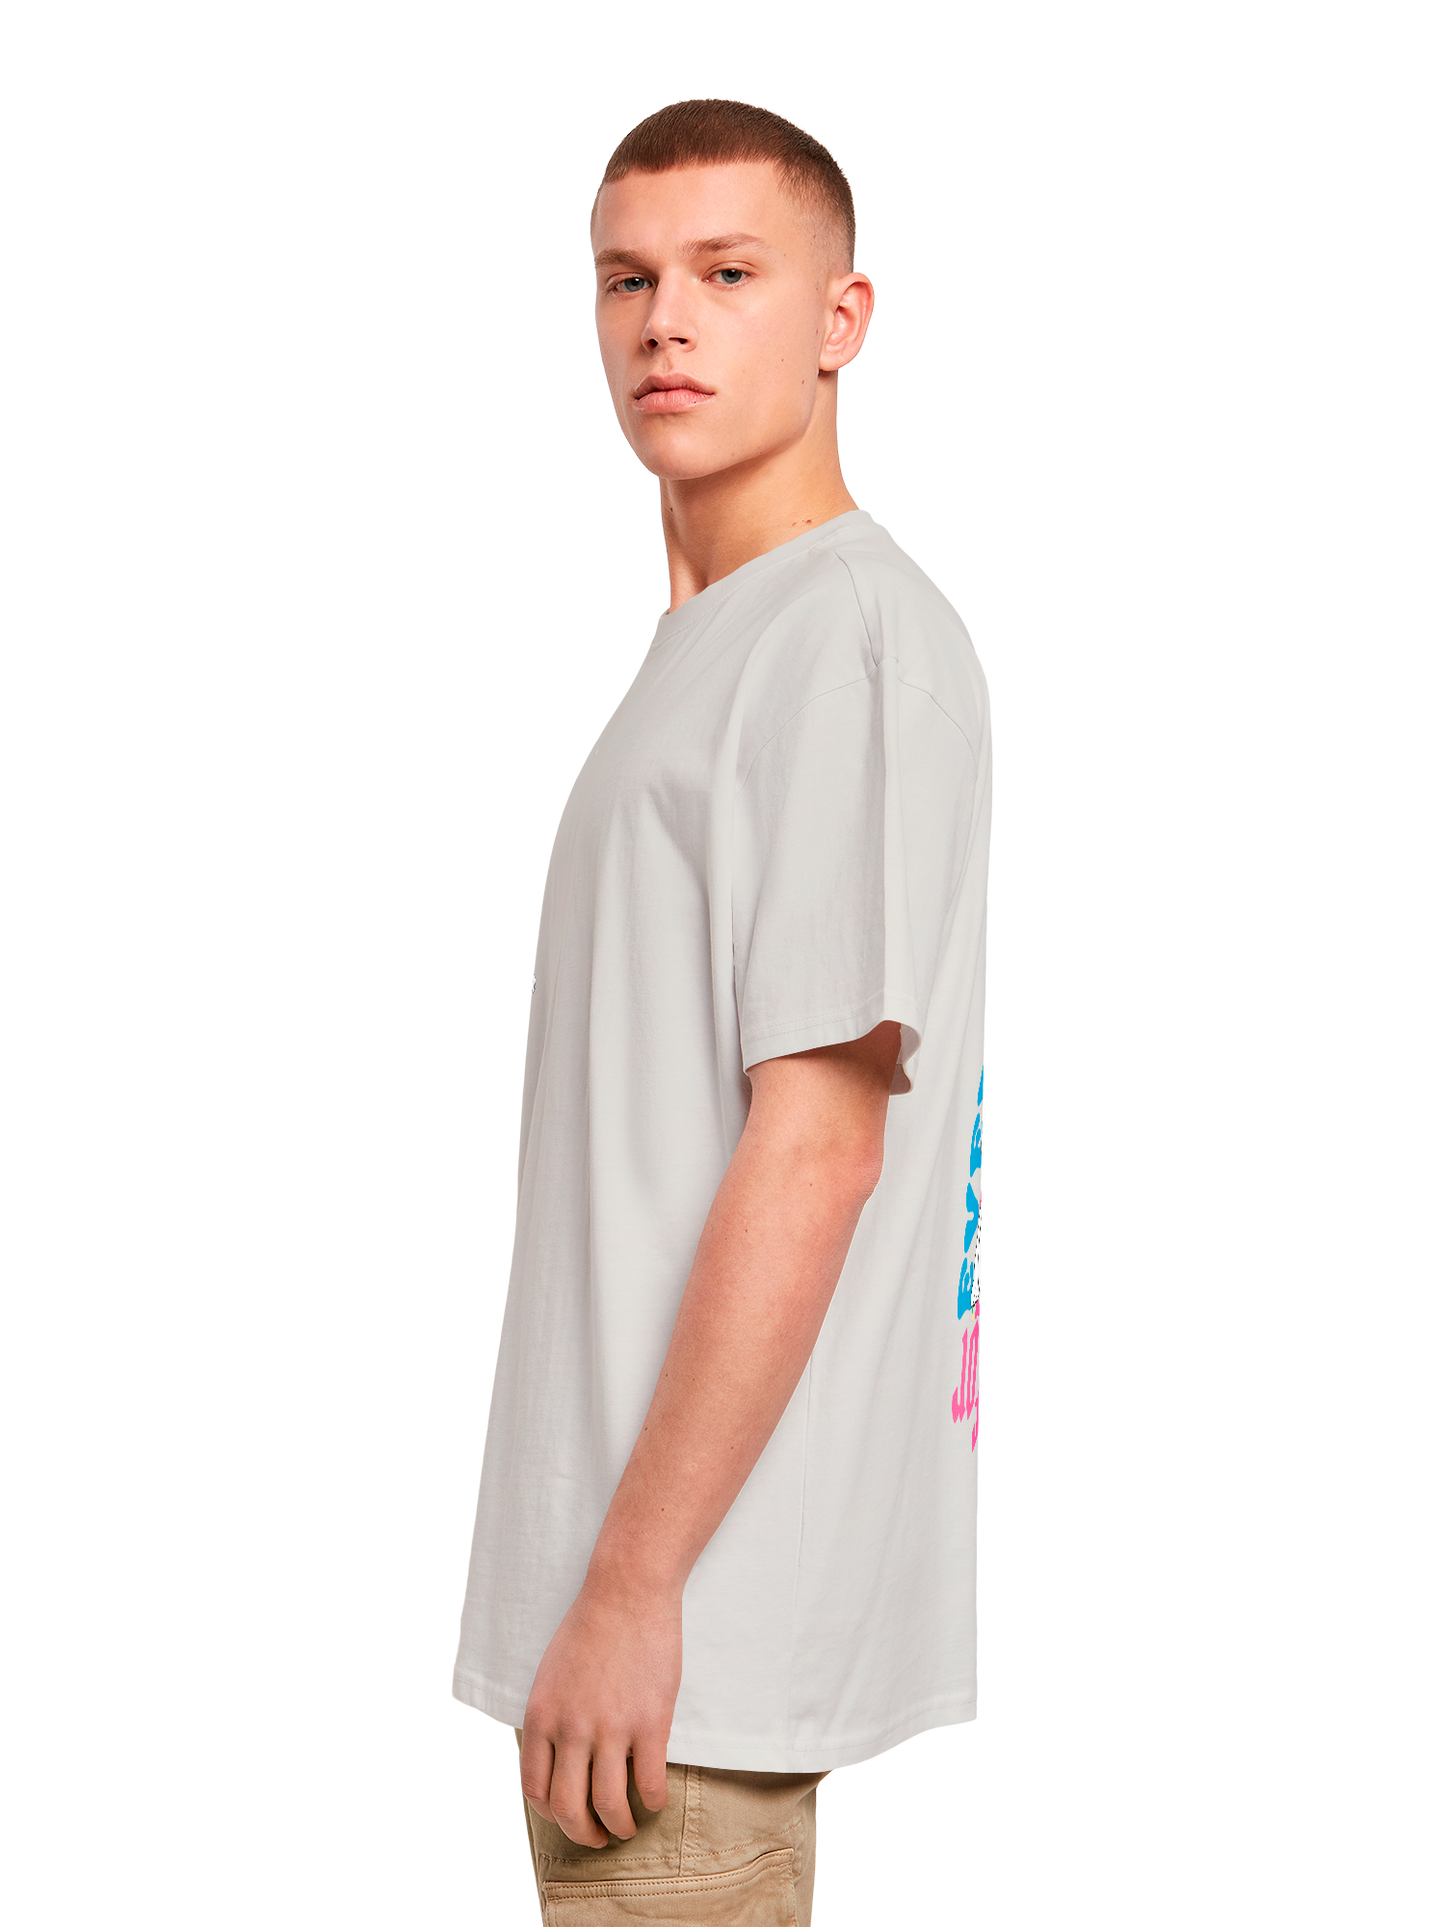 Alice im Wunderland Late For Everything | Heroes of Childhood | Boys Oversize Tee